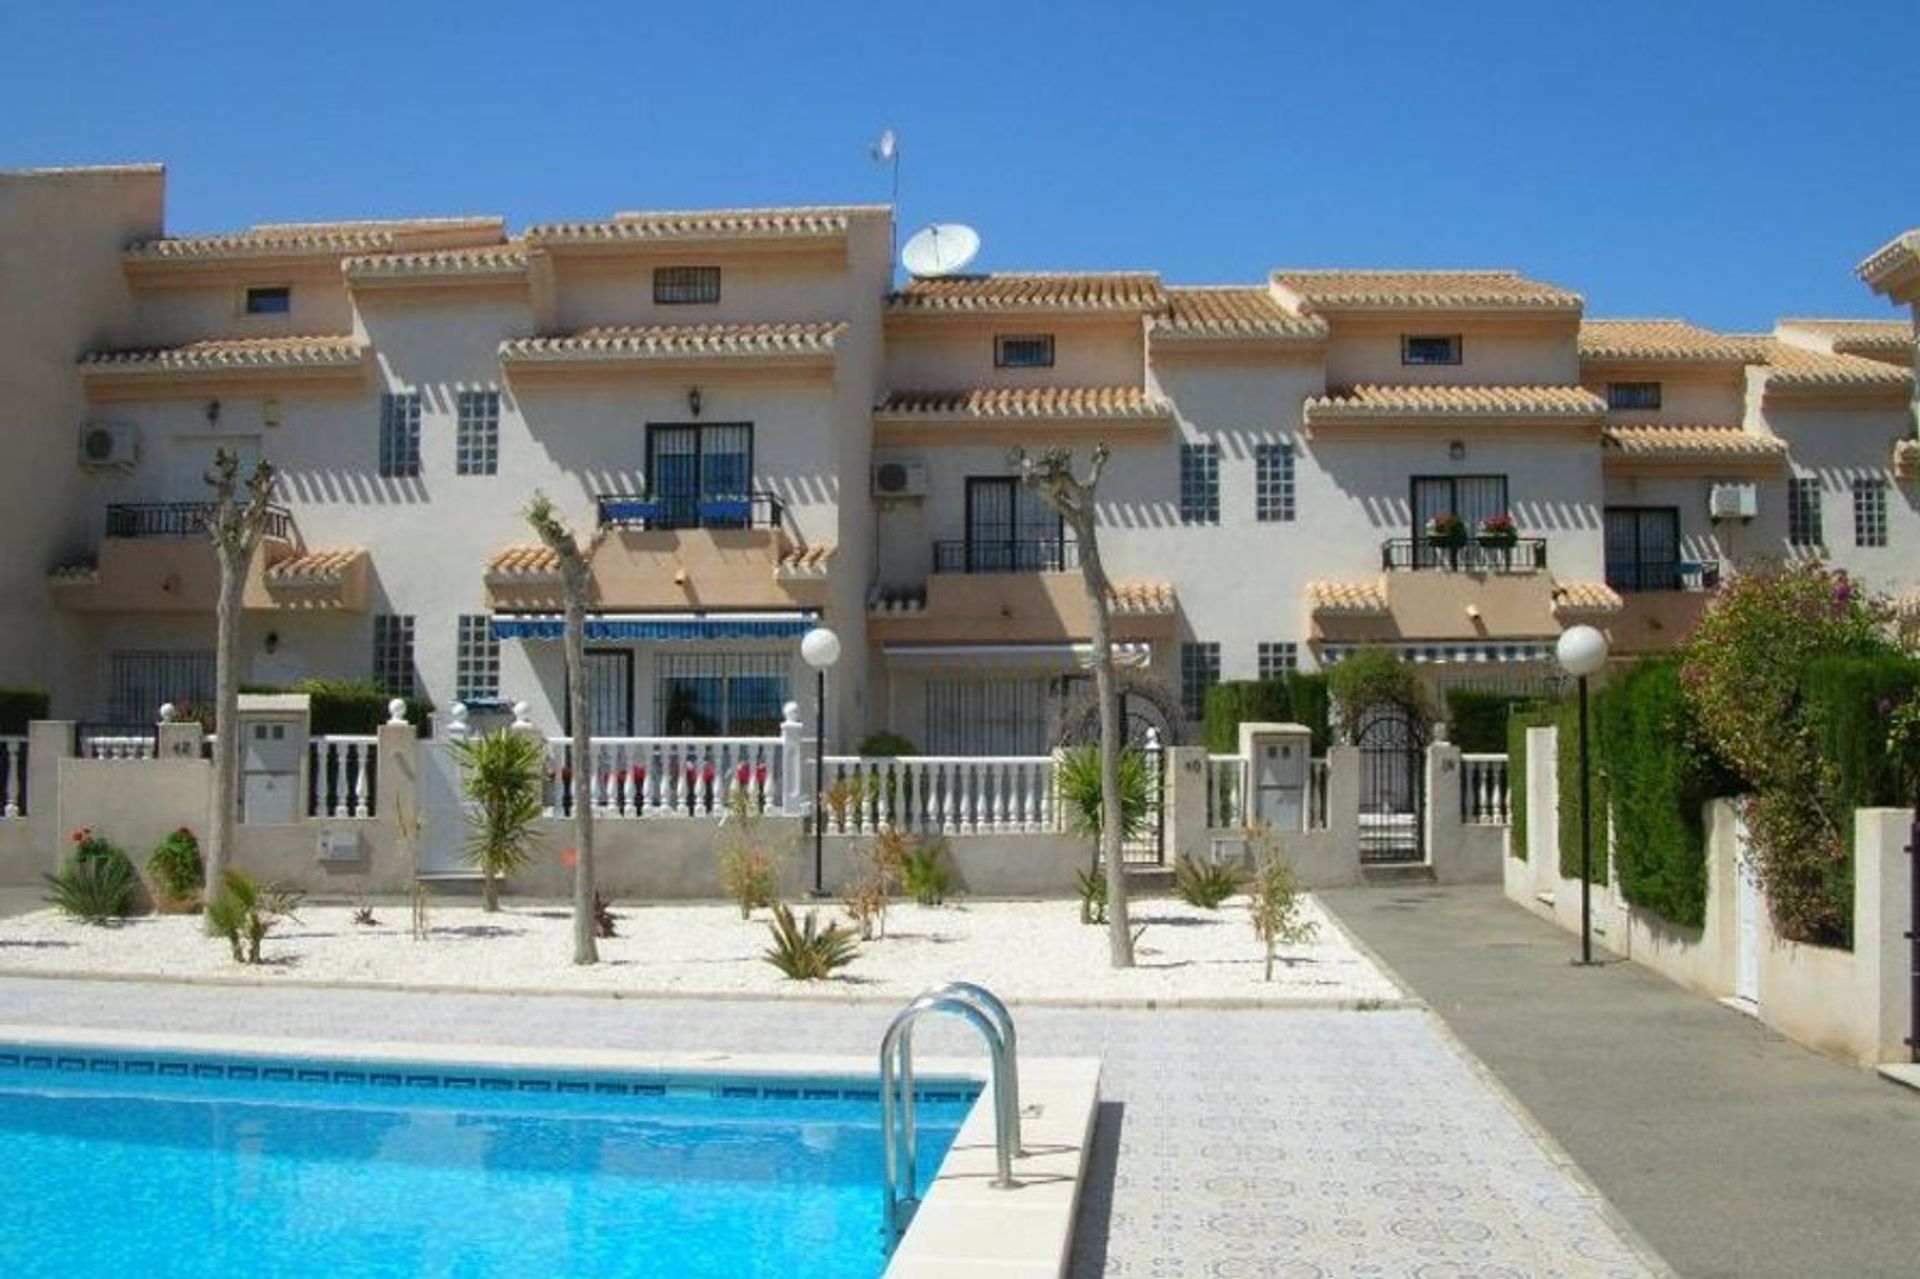 Enjoy your holiday under the Mediterranean sun with our properties in Playa Flamenca